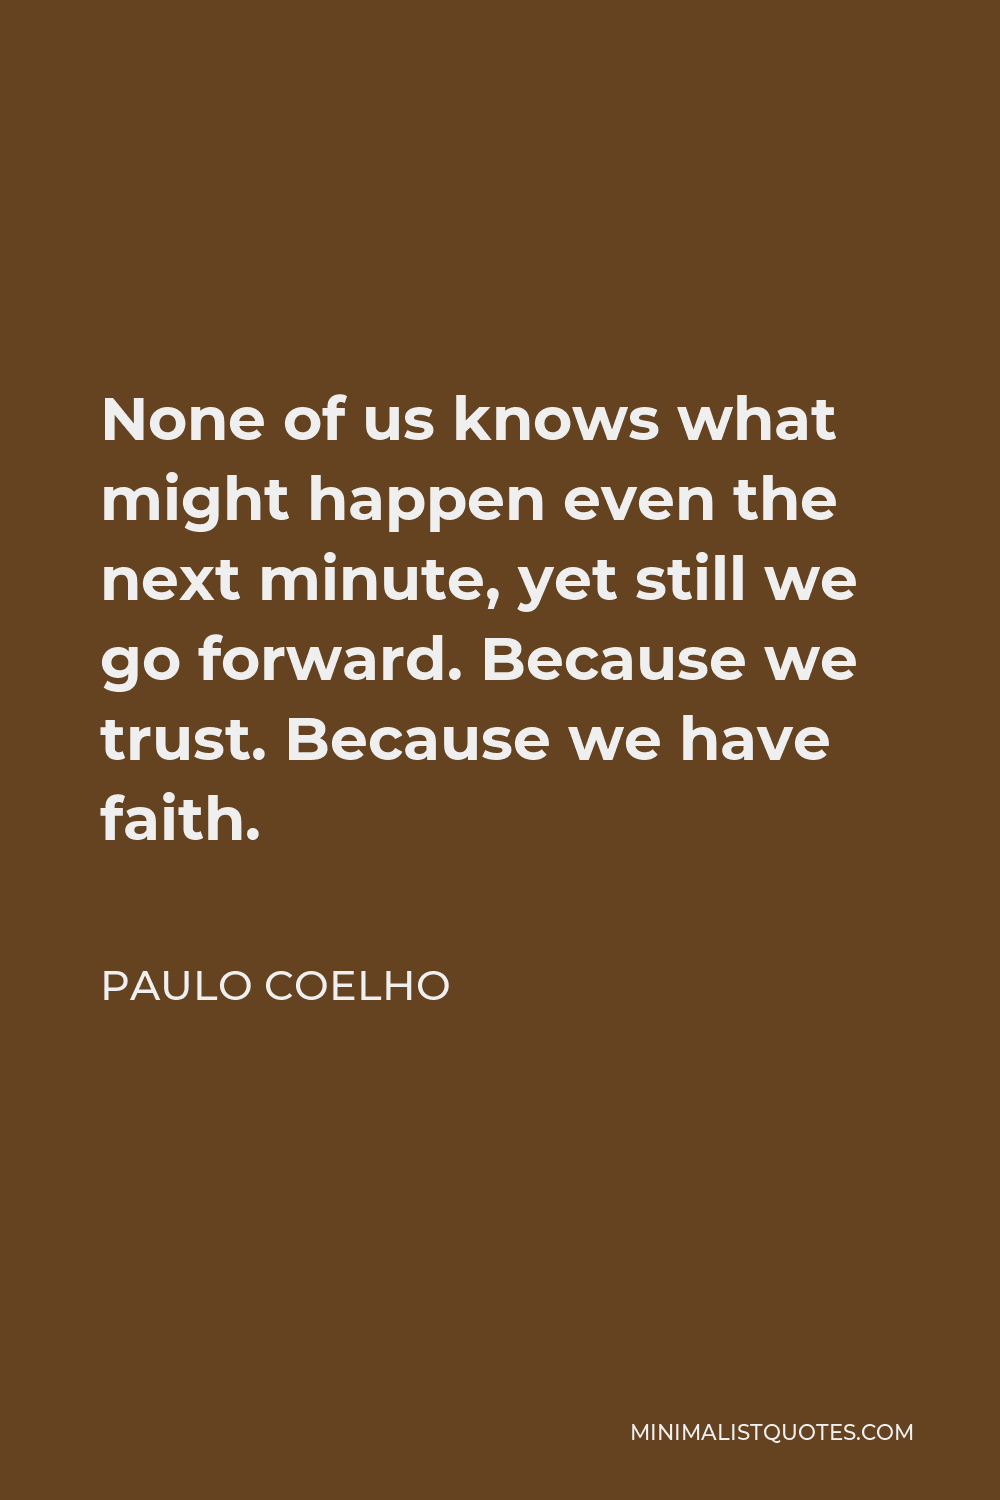 Paulo Coelho Quote - None of us knows what might happen even the next minute, yet still we go forward. Because we trust. Because we have faith.